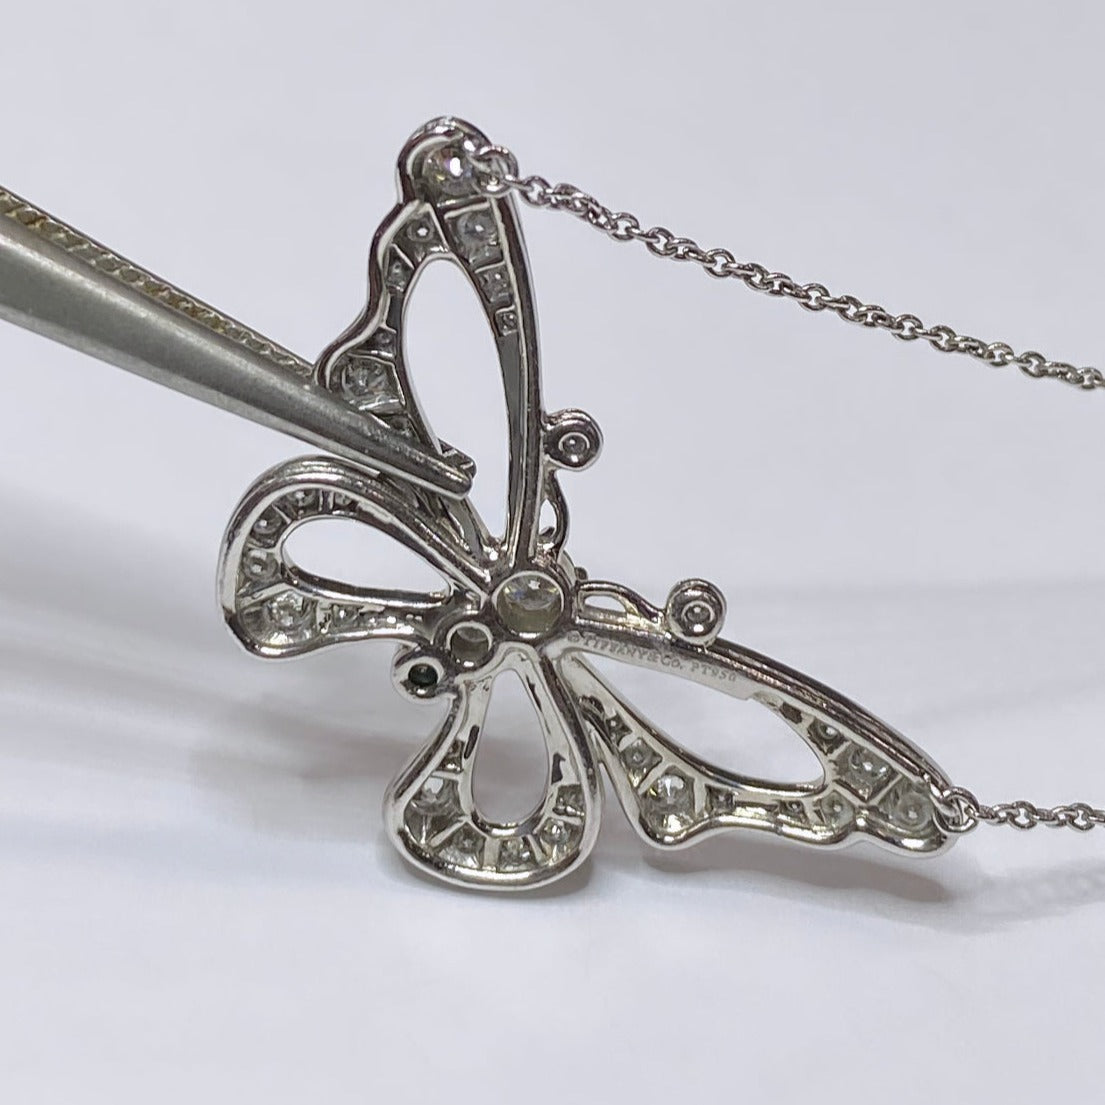 Tiffany & Co. Diamond Butterfly Necklace In Platinum